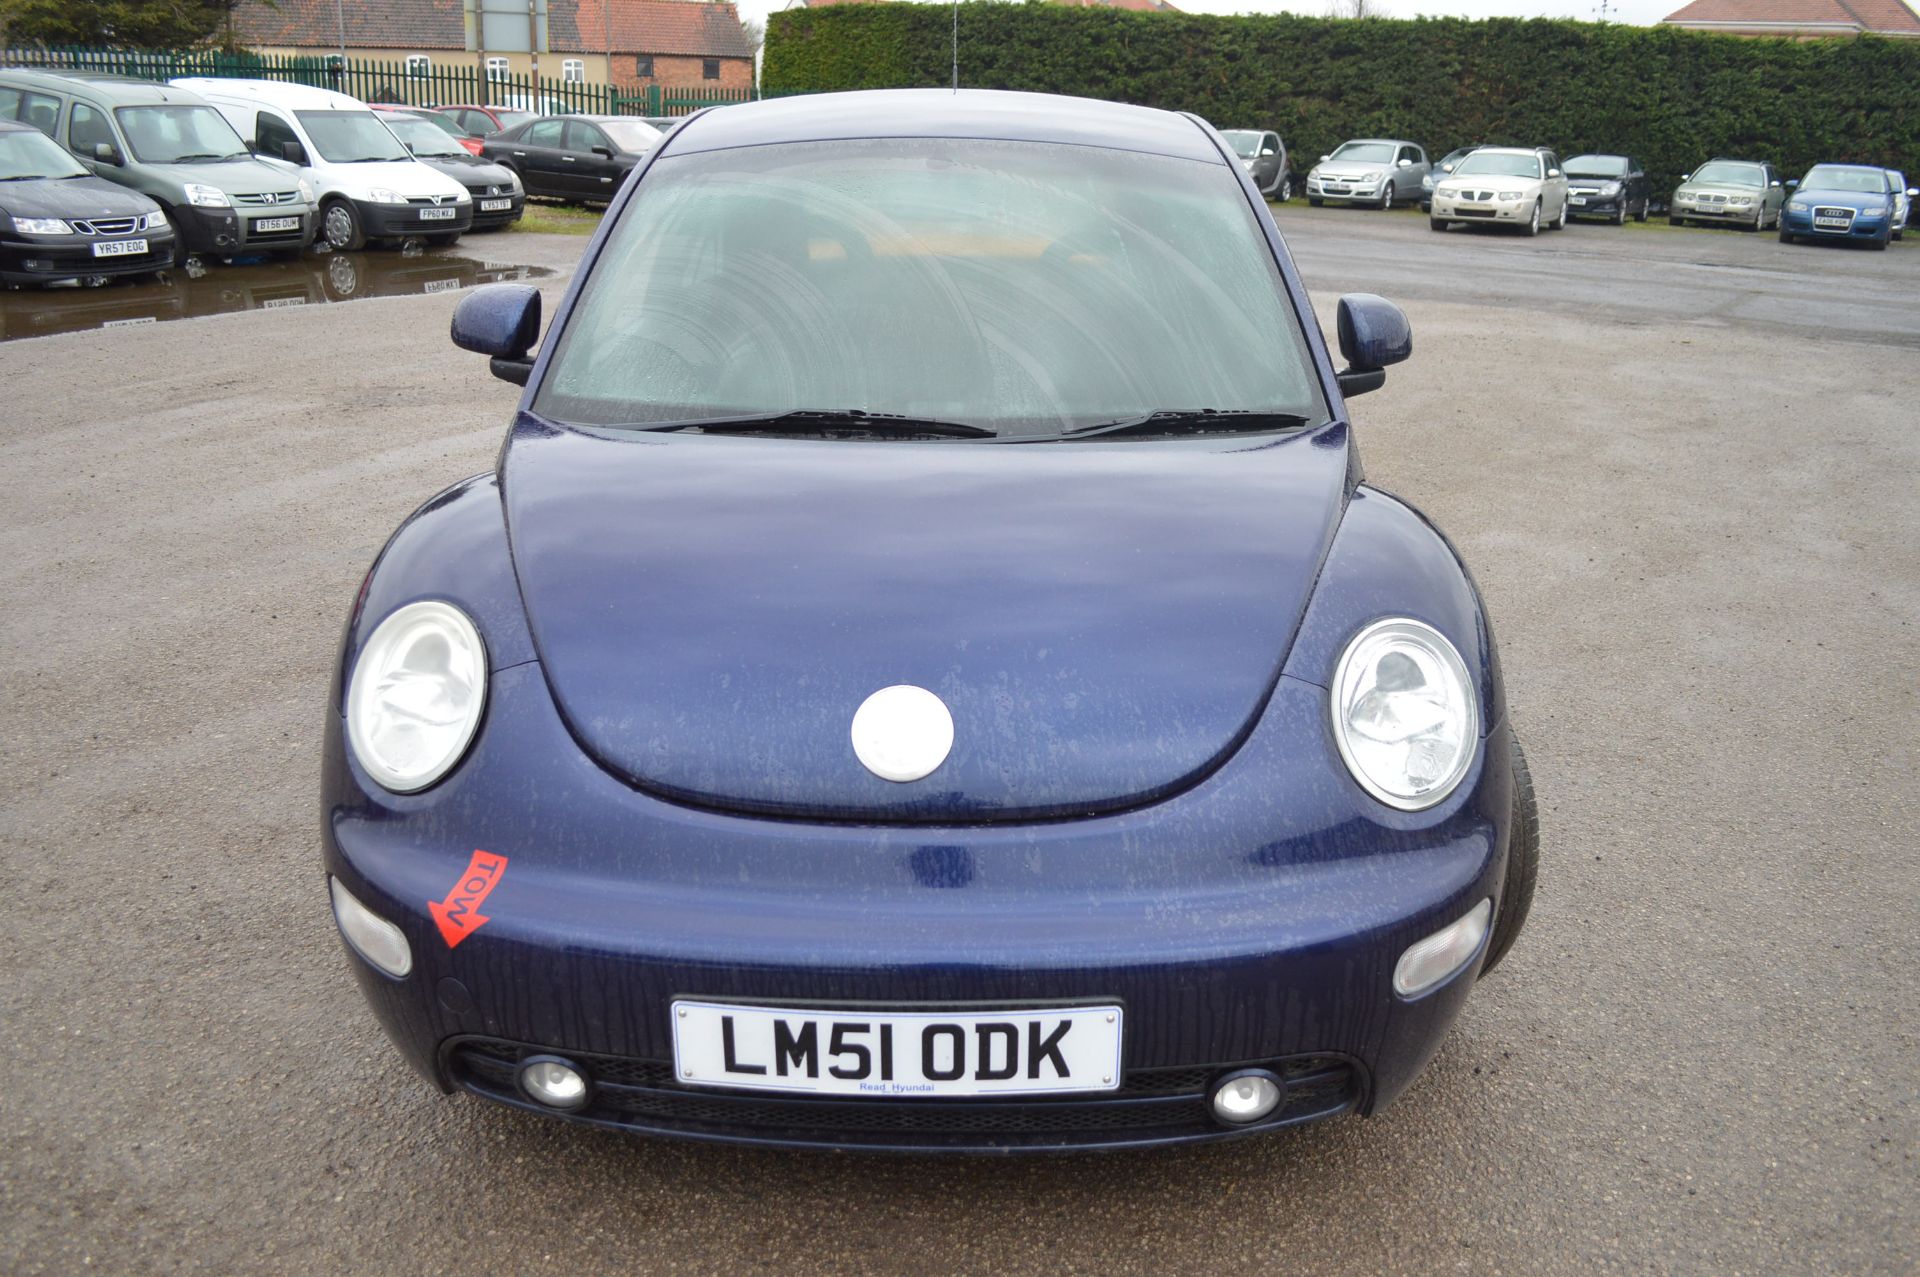 2001/51 REG VOLKSWAGEN BEETLE TURBO 1.8 TRACK CAR 5 SPEED MANUAL GOOD STRONG ENGINE AND BOX HAS JUST - Image 2 of 16